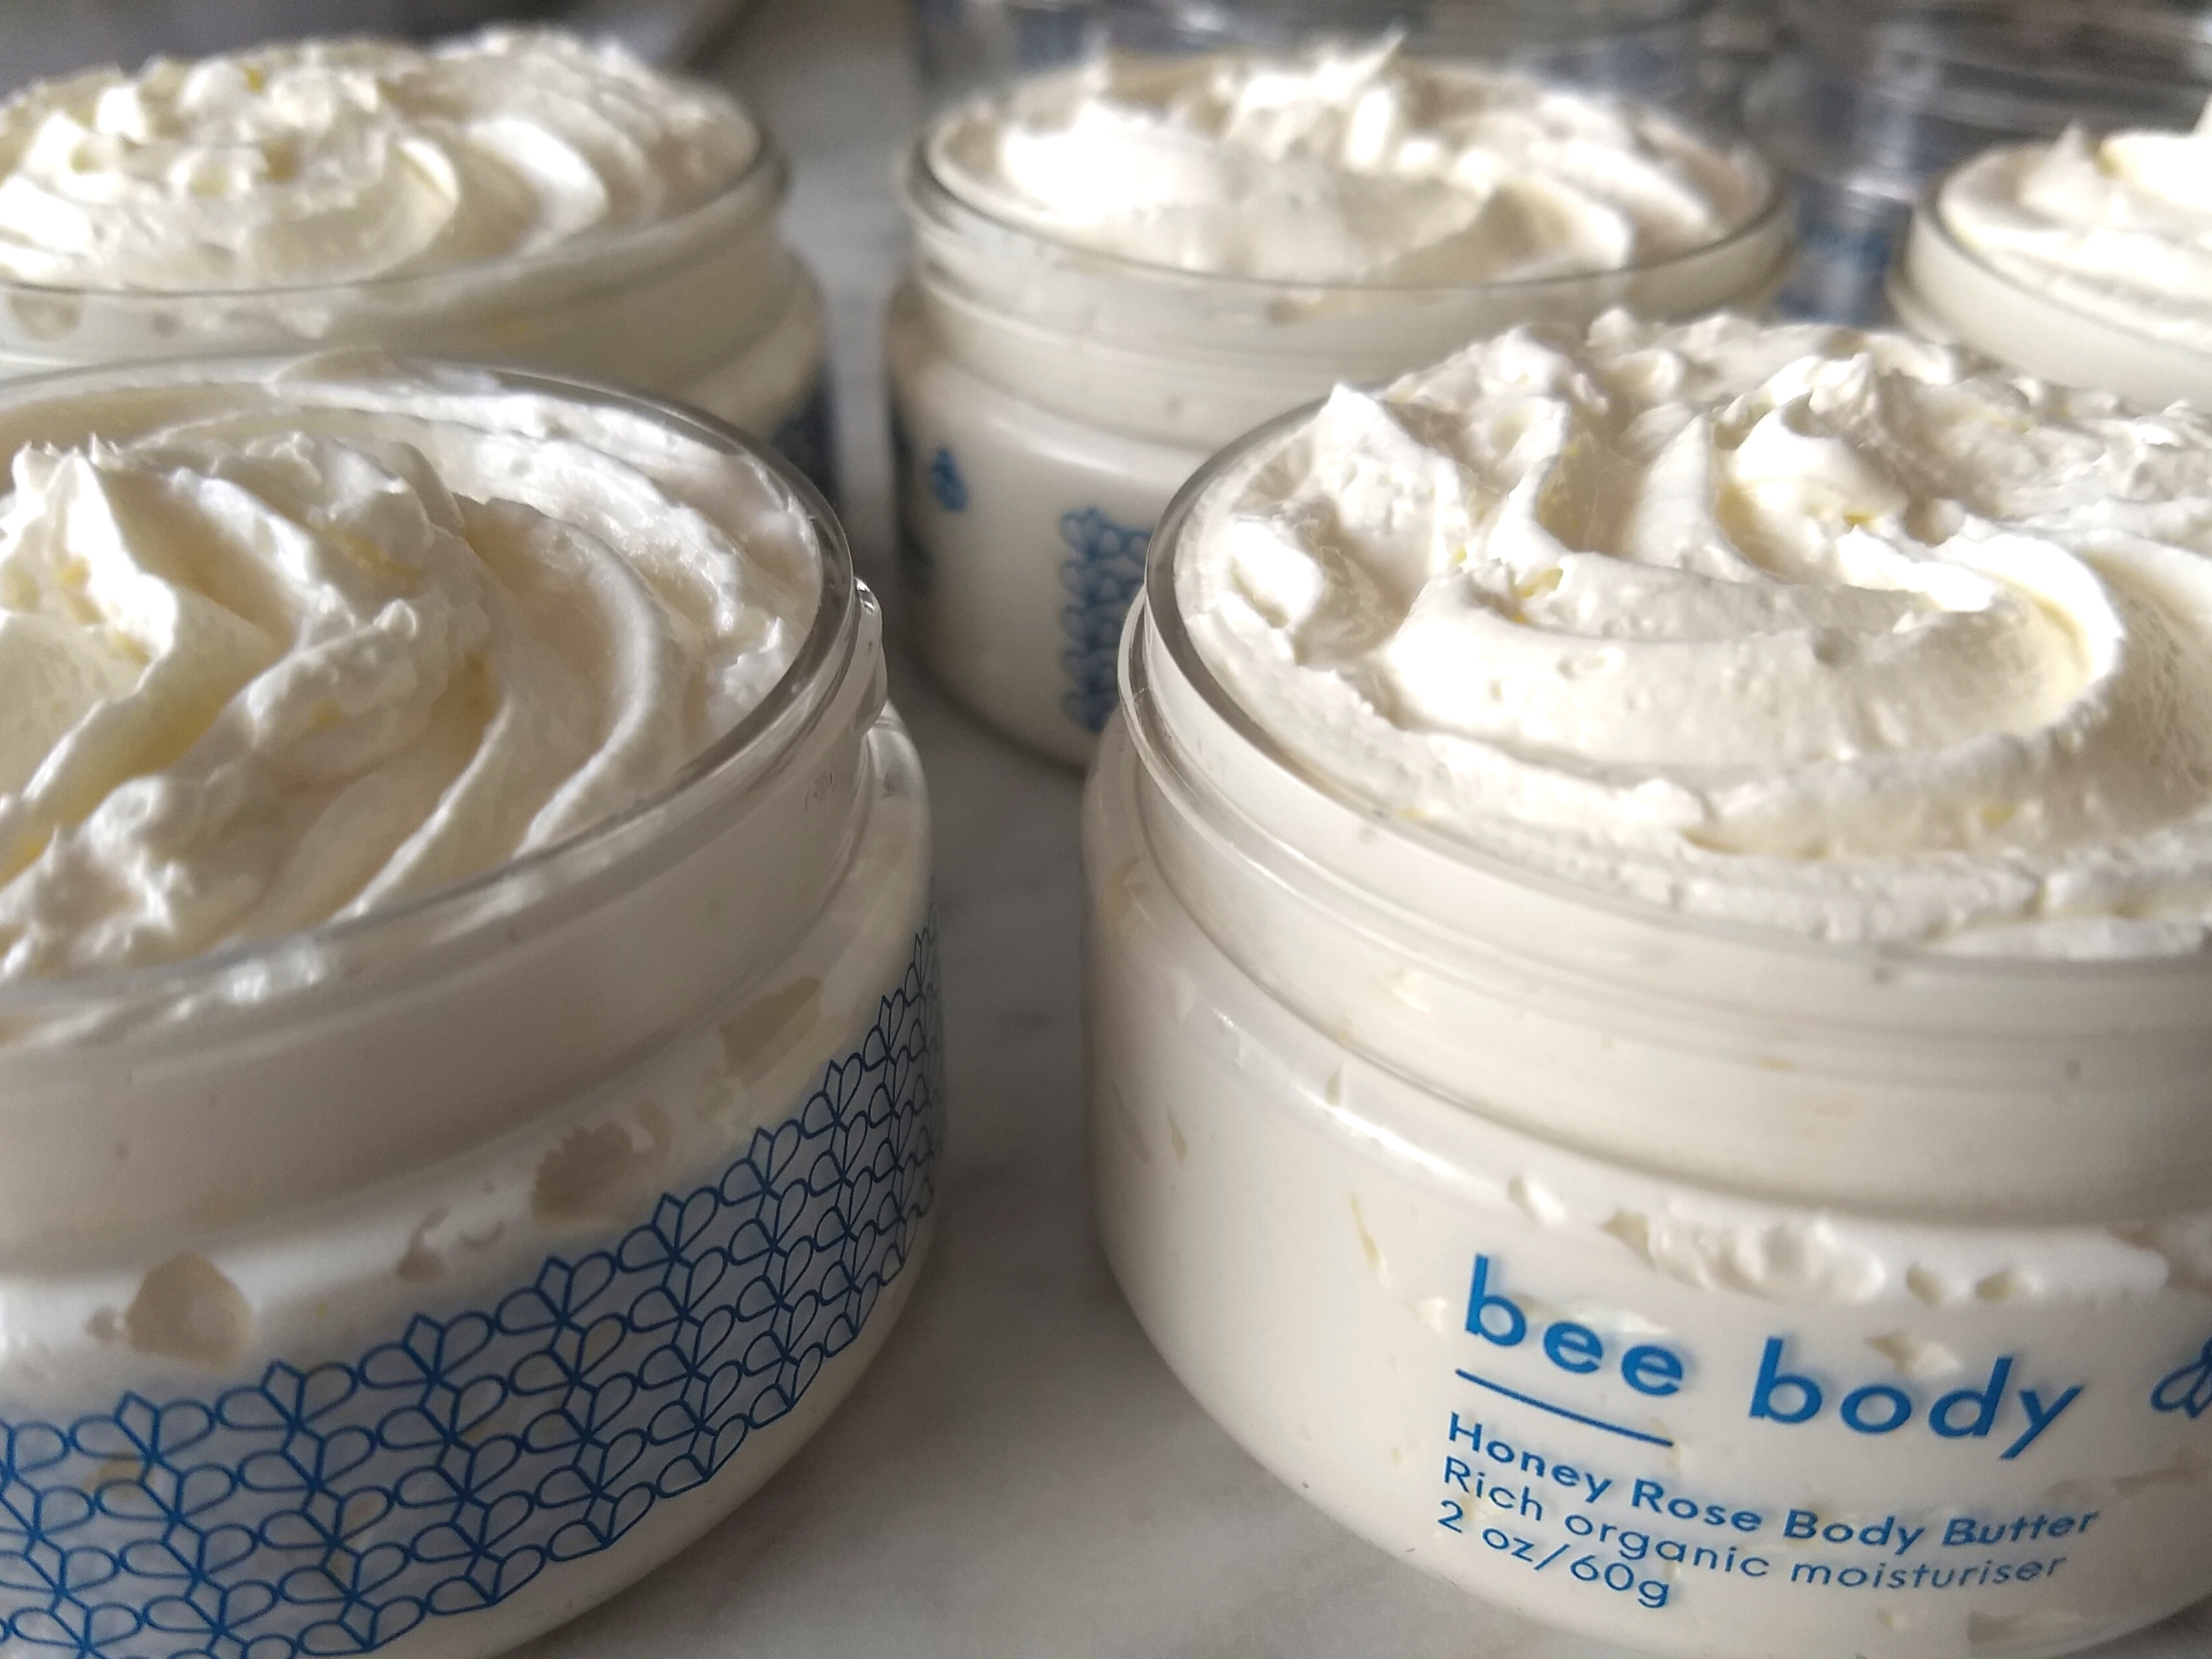 Honey Rose Body Butter: Multiple jars of creamy goodness, with lids removed, revealing the smooth and velvety texture of each delectable blend.